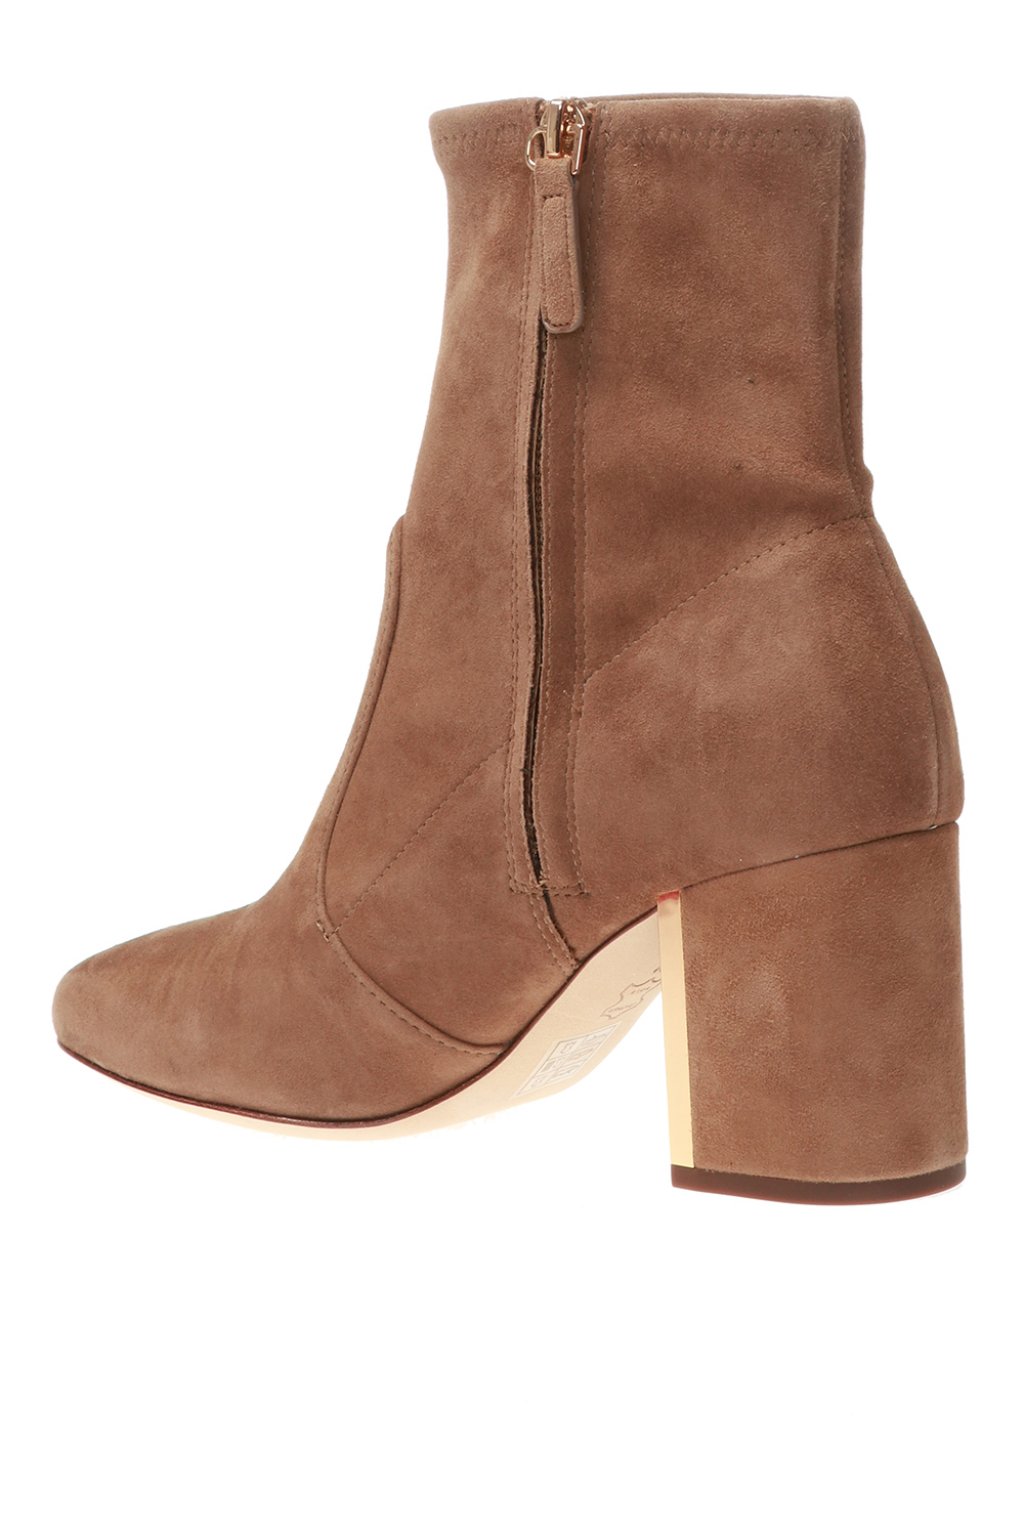 Brown 'Gigi' suede ankle boots Tory Burch - Vitkac TW